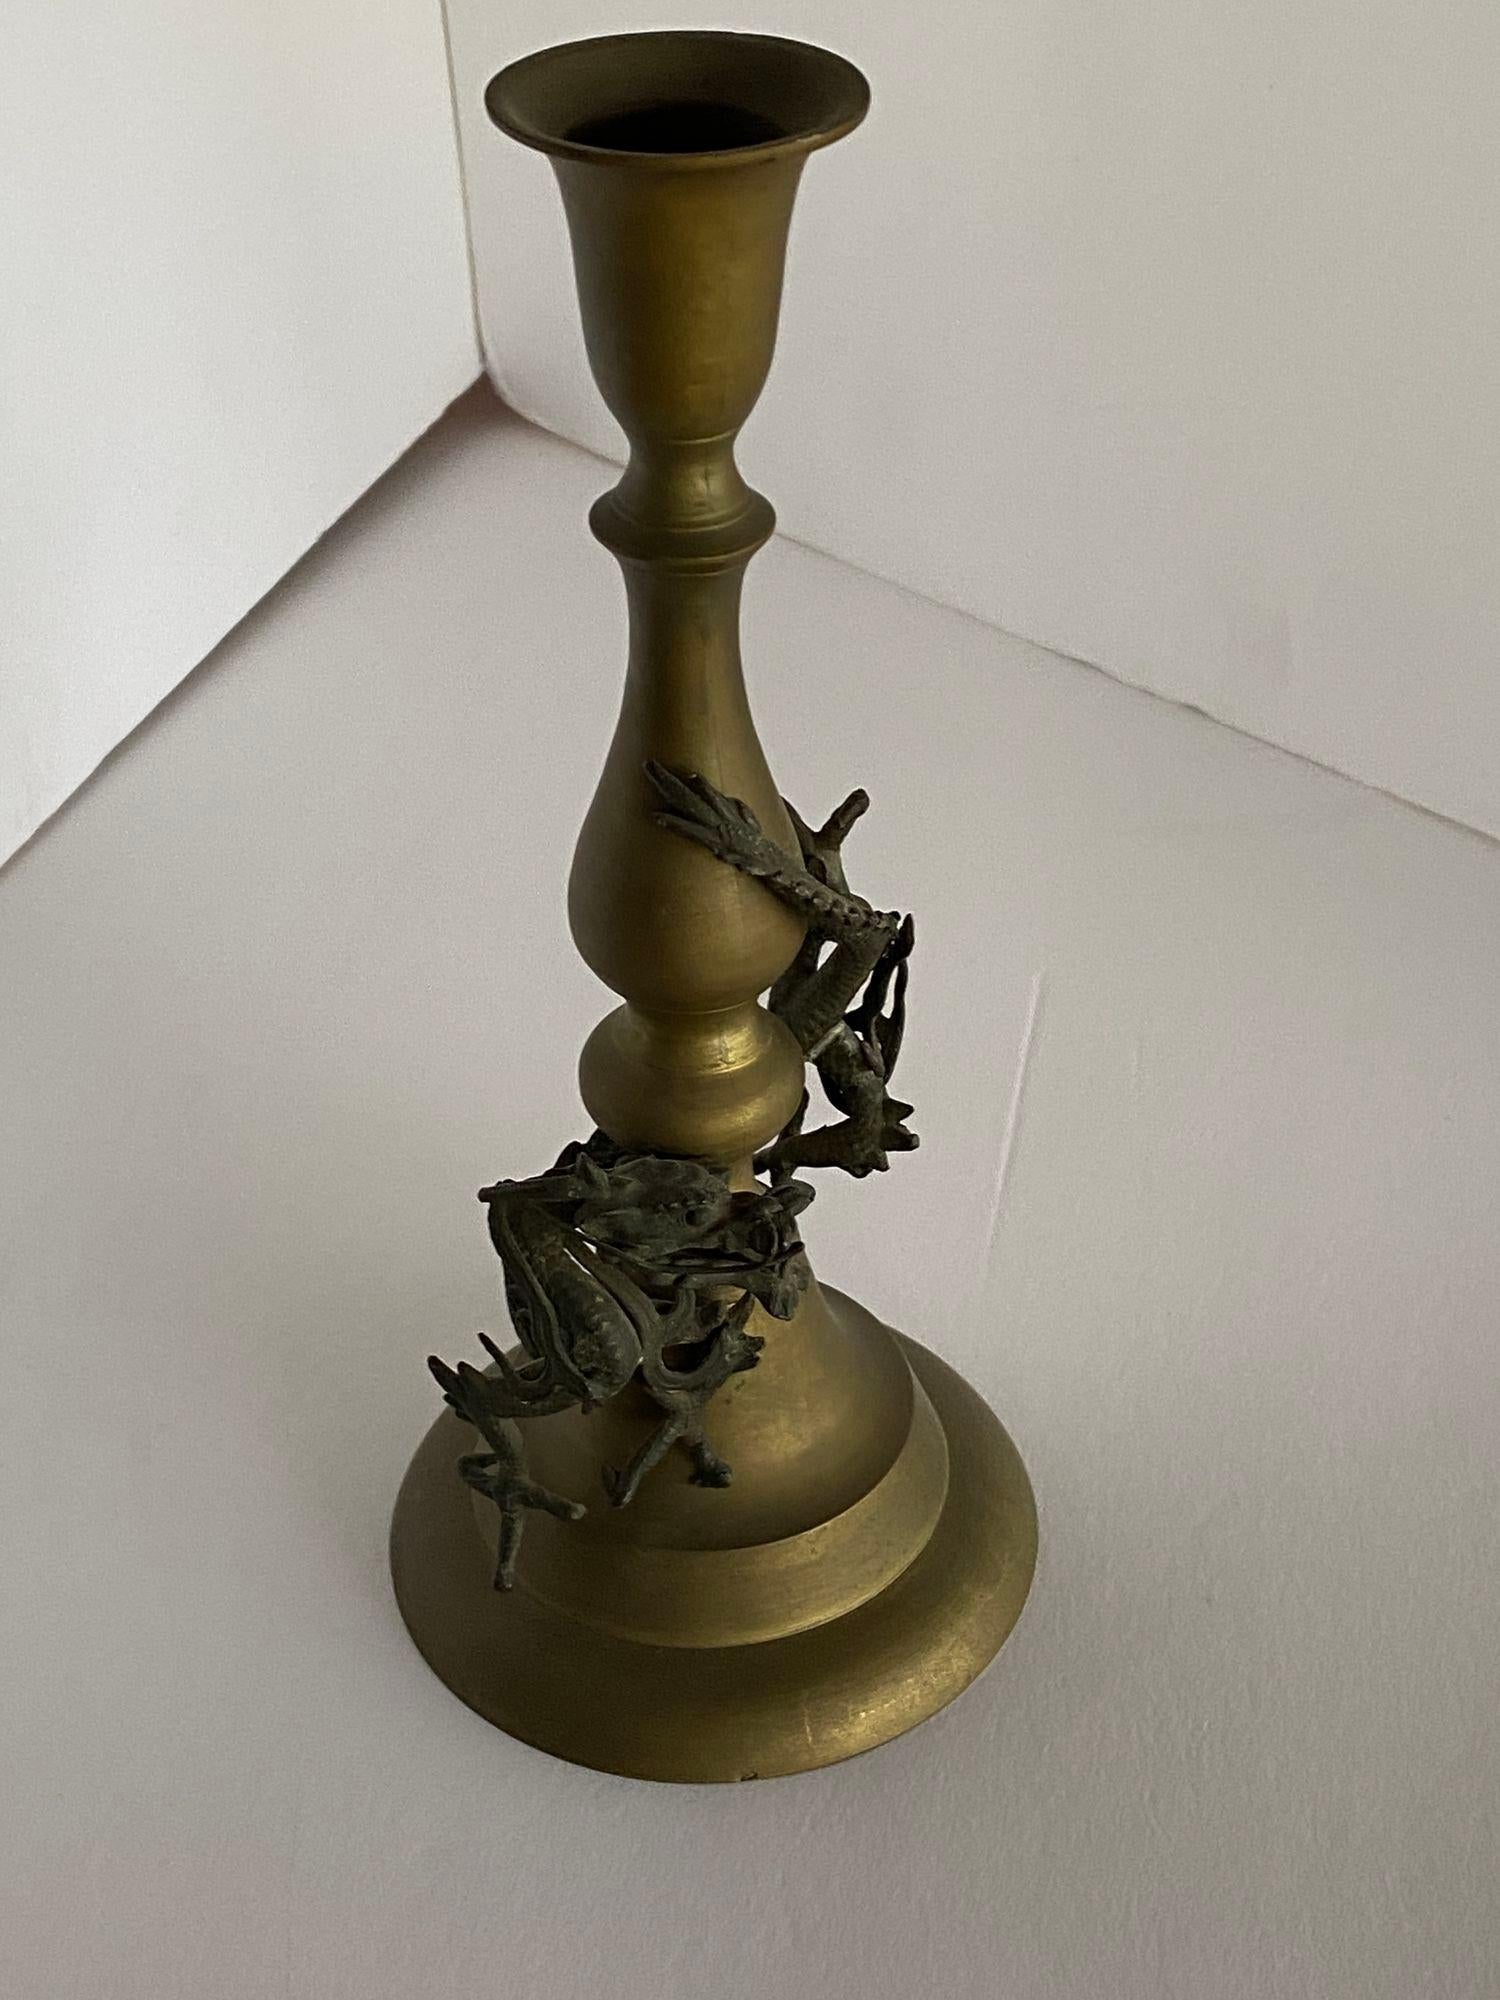 Hand Casted Brass Candlestick Holder w/ Chinese Dragon, Circa 1920 For Sale 1